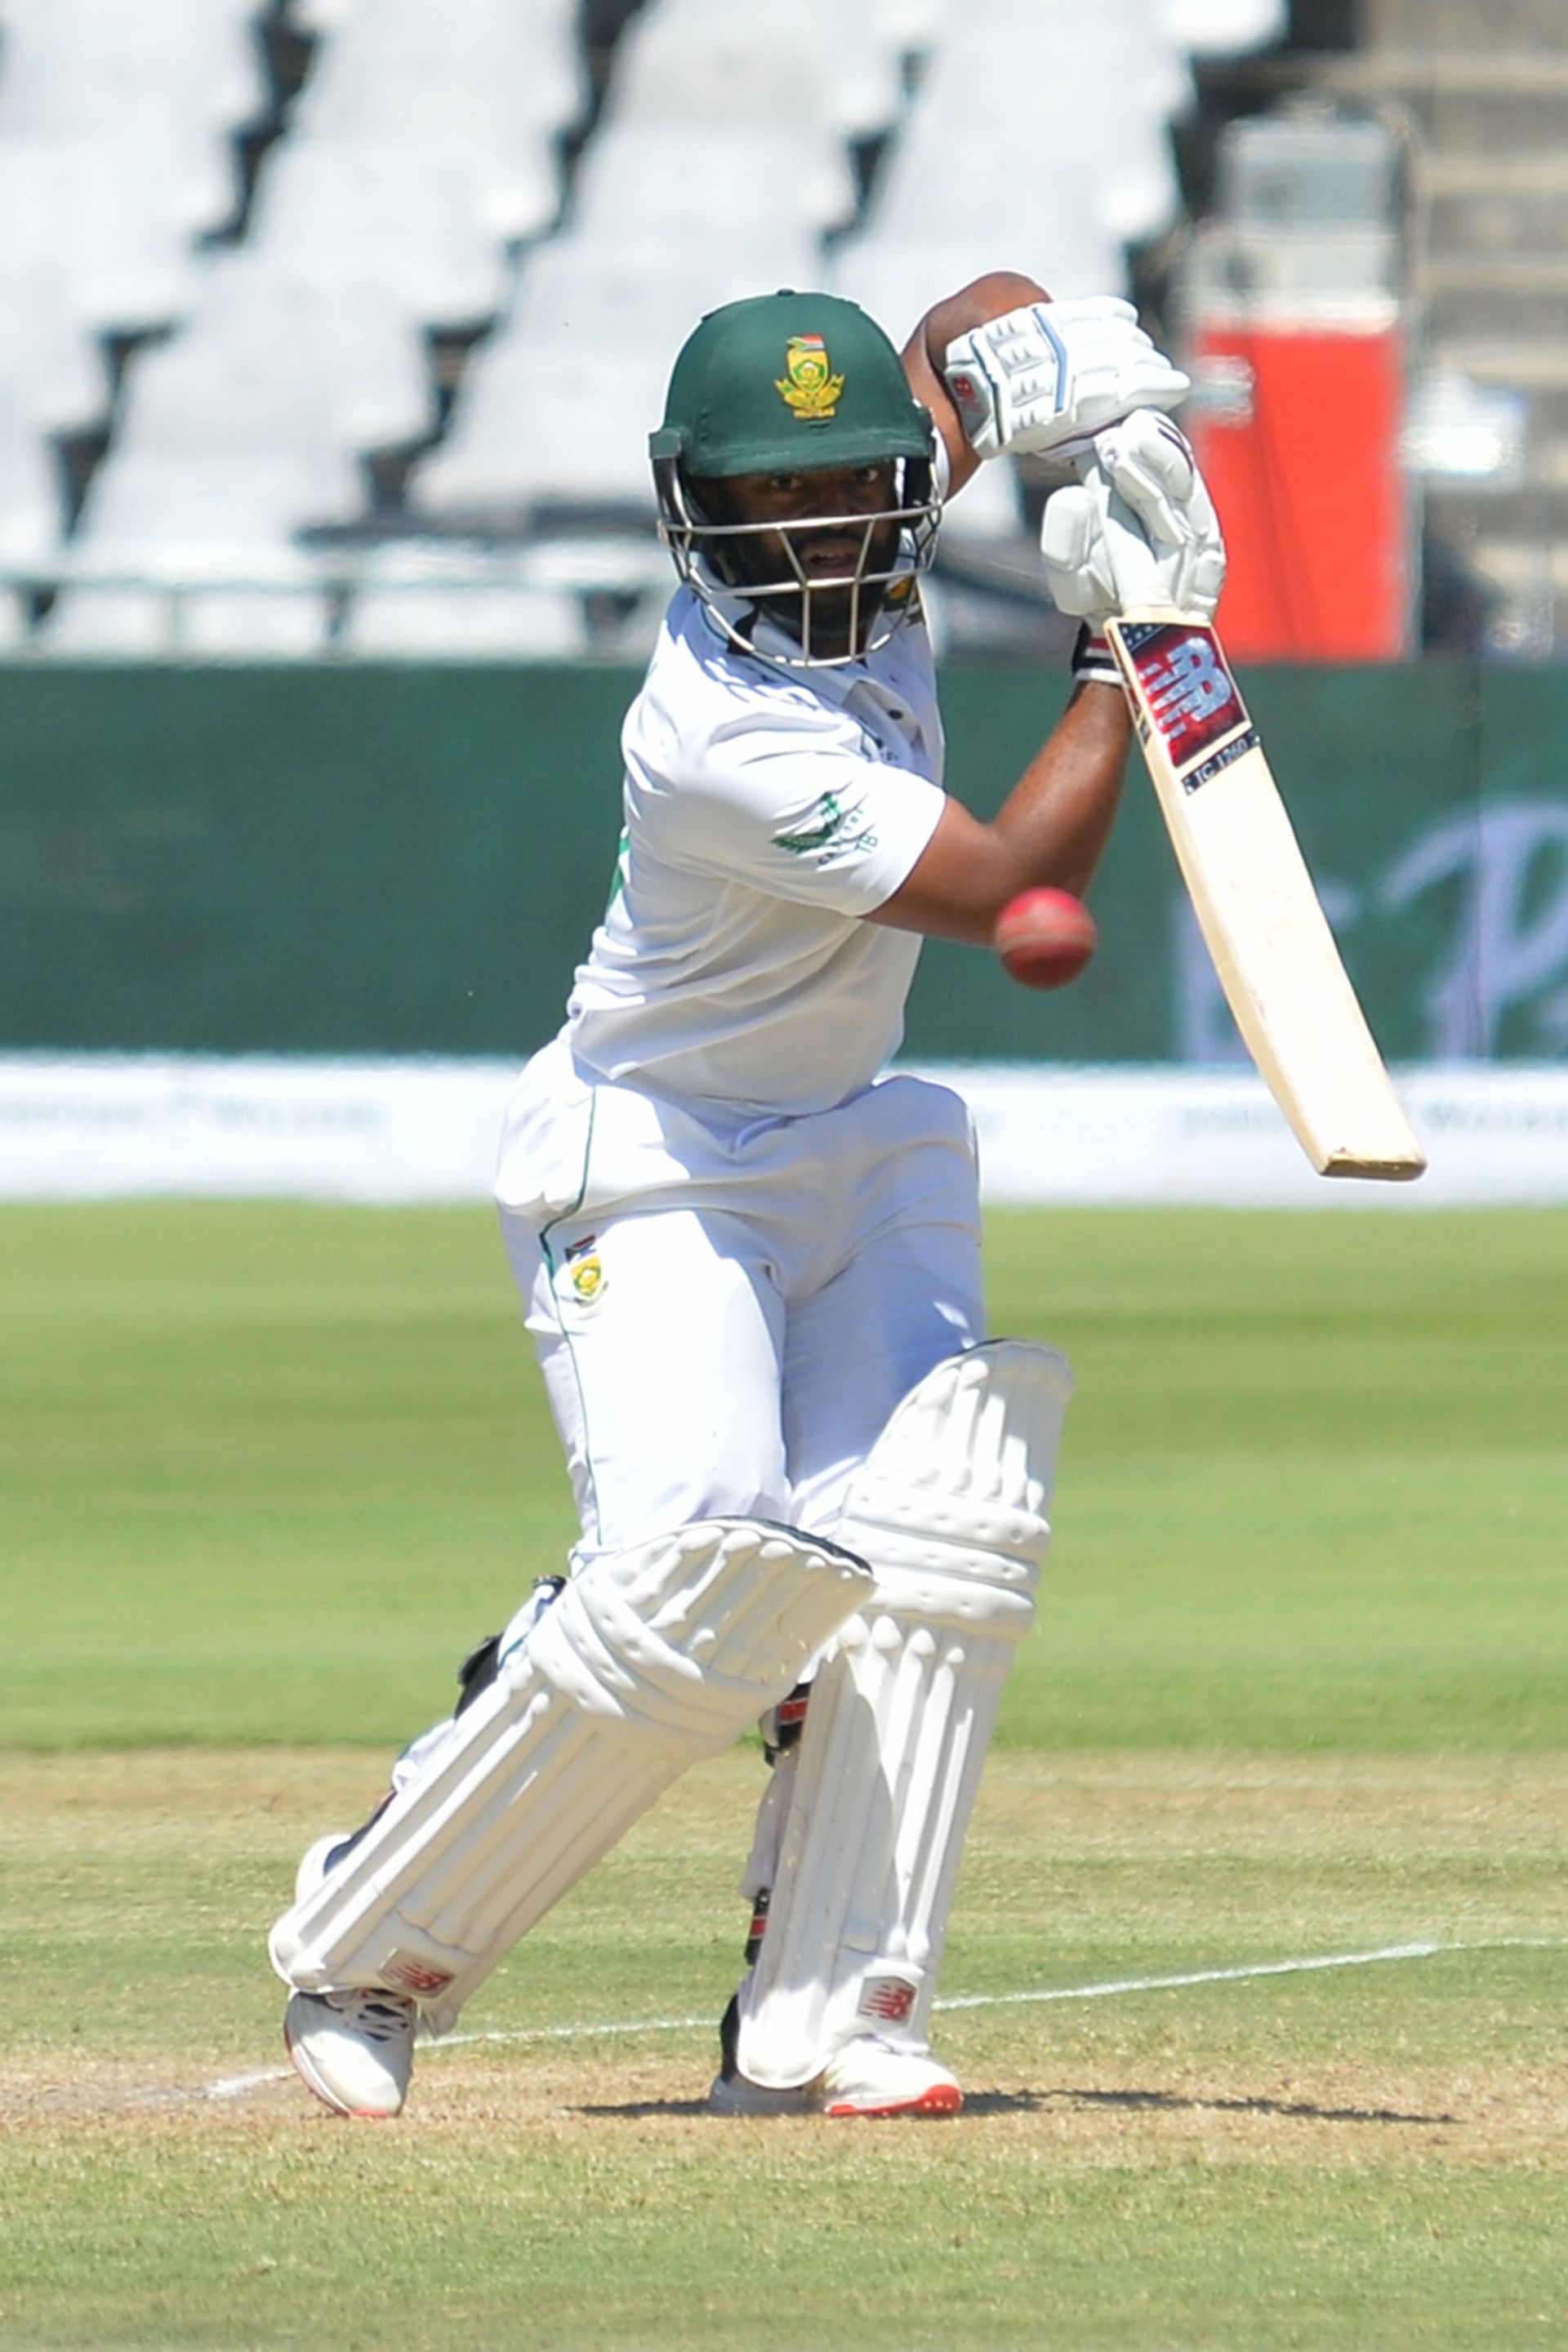 Temba Bavuma played key knocks for his team against India in the recent Test series